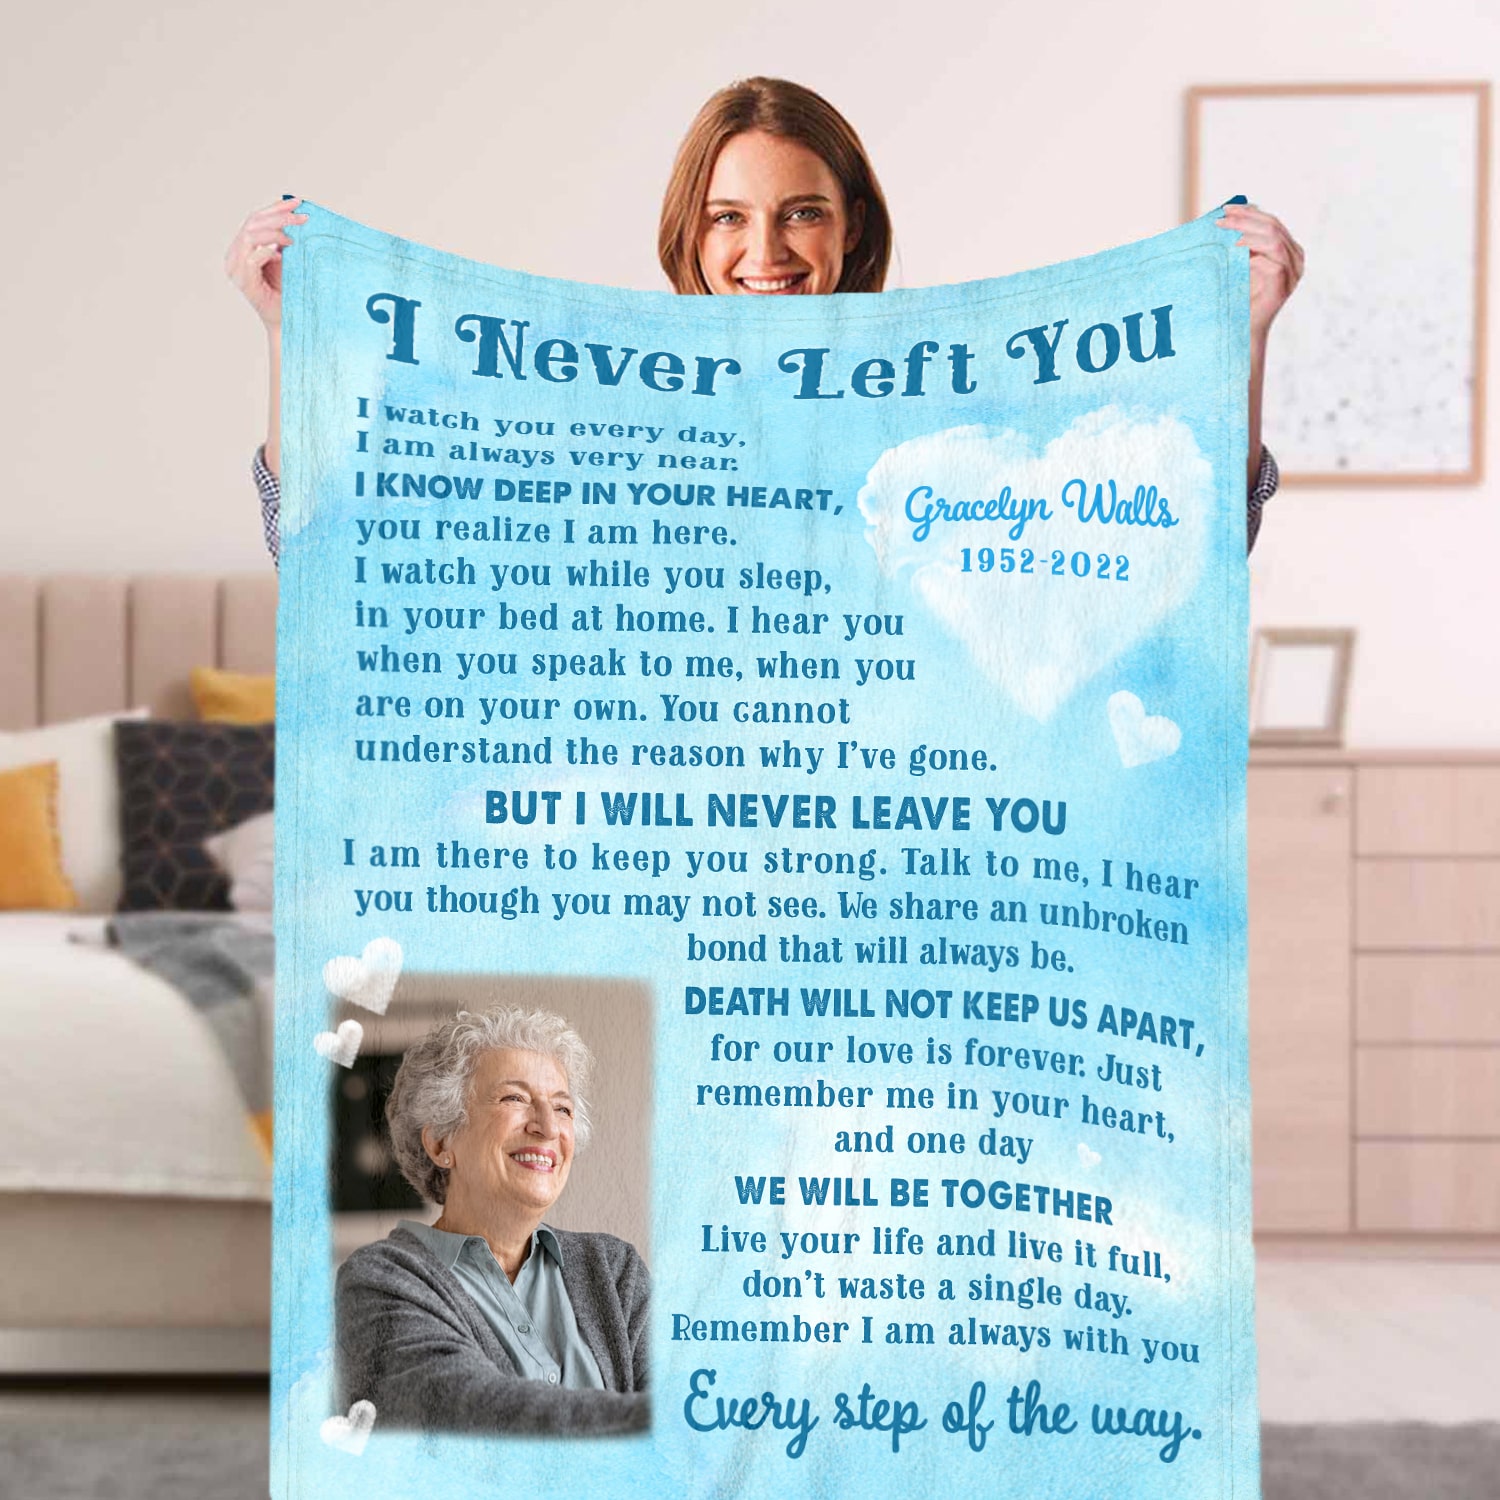 Best Blanket Birthday Gifts For Mom - Gift For Mother's Day From Daughter  Son Throw Blanket - Presents To Dear Mom